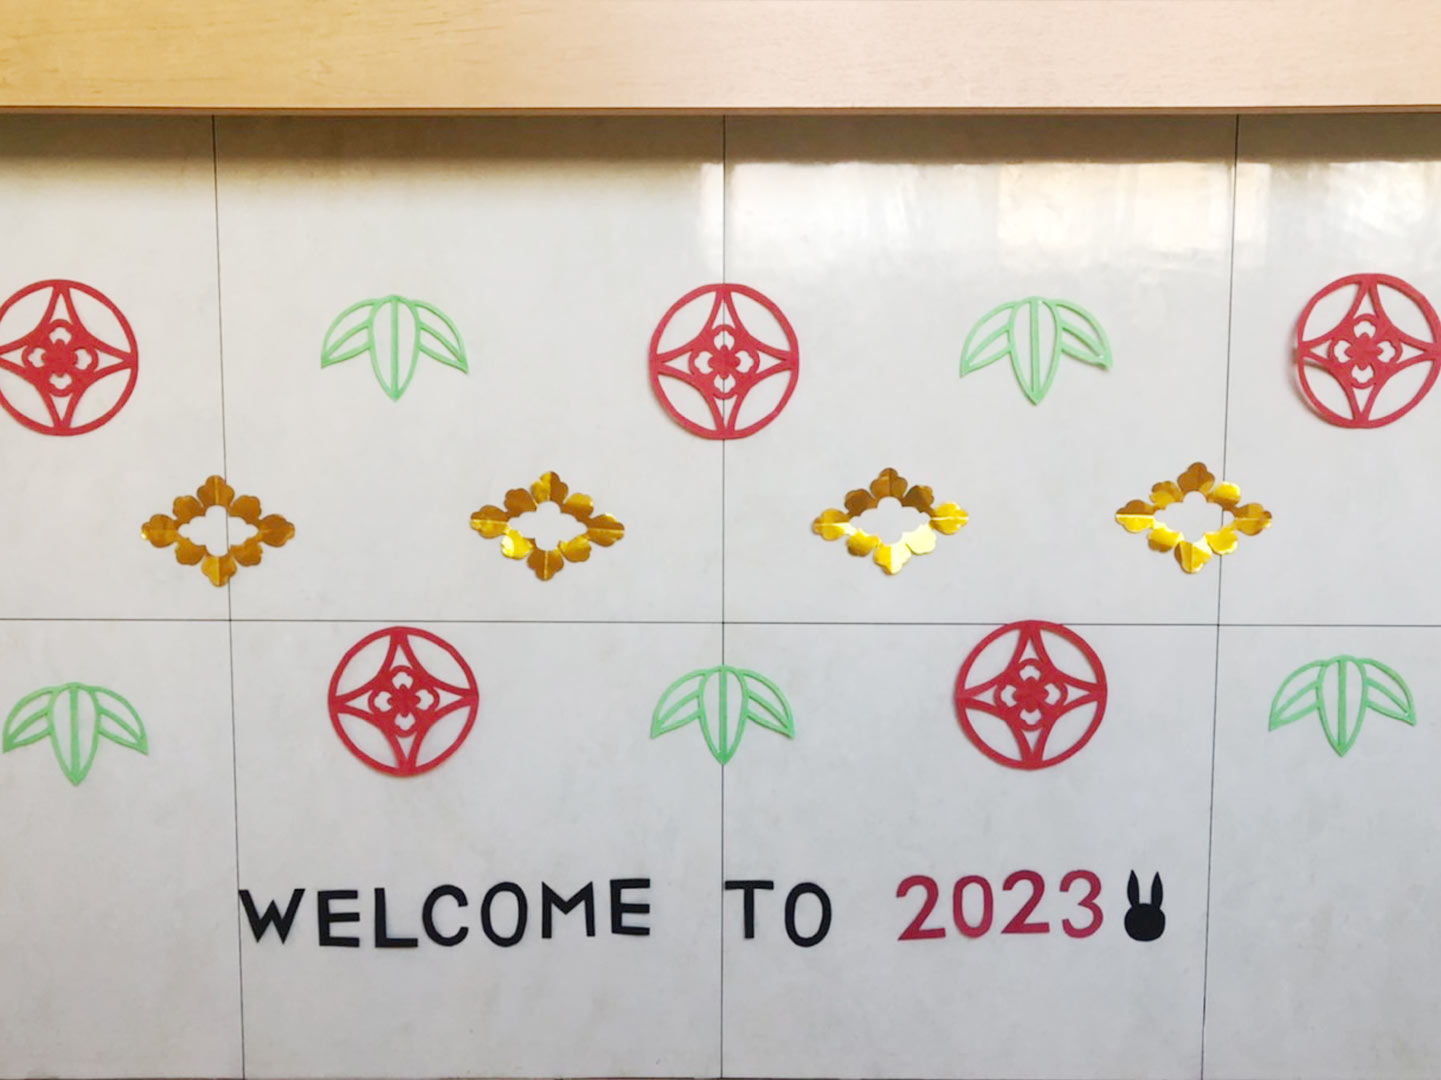 WELCOME TO 2023